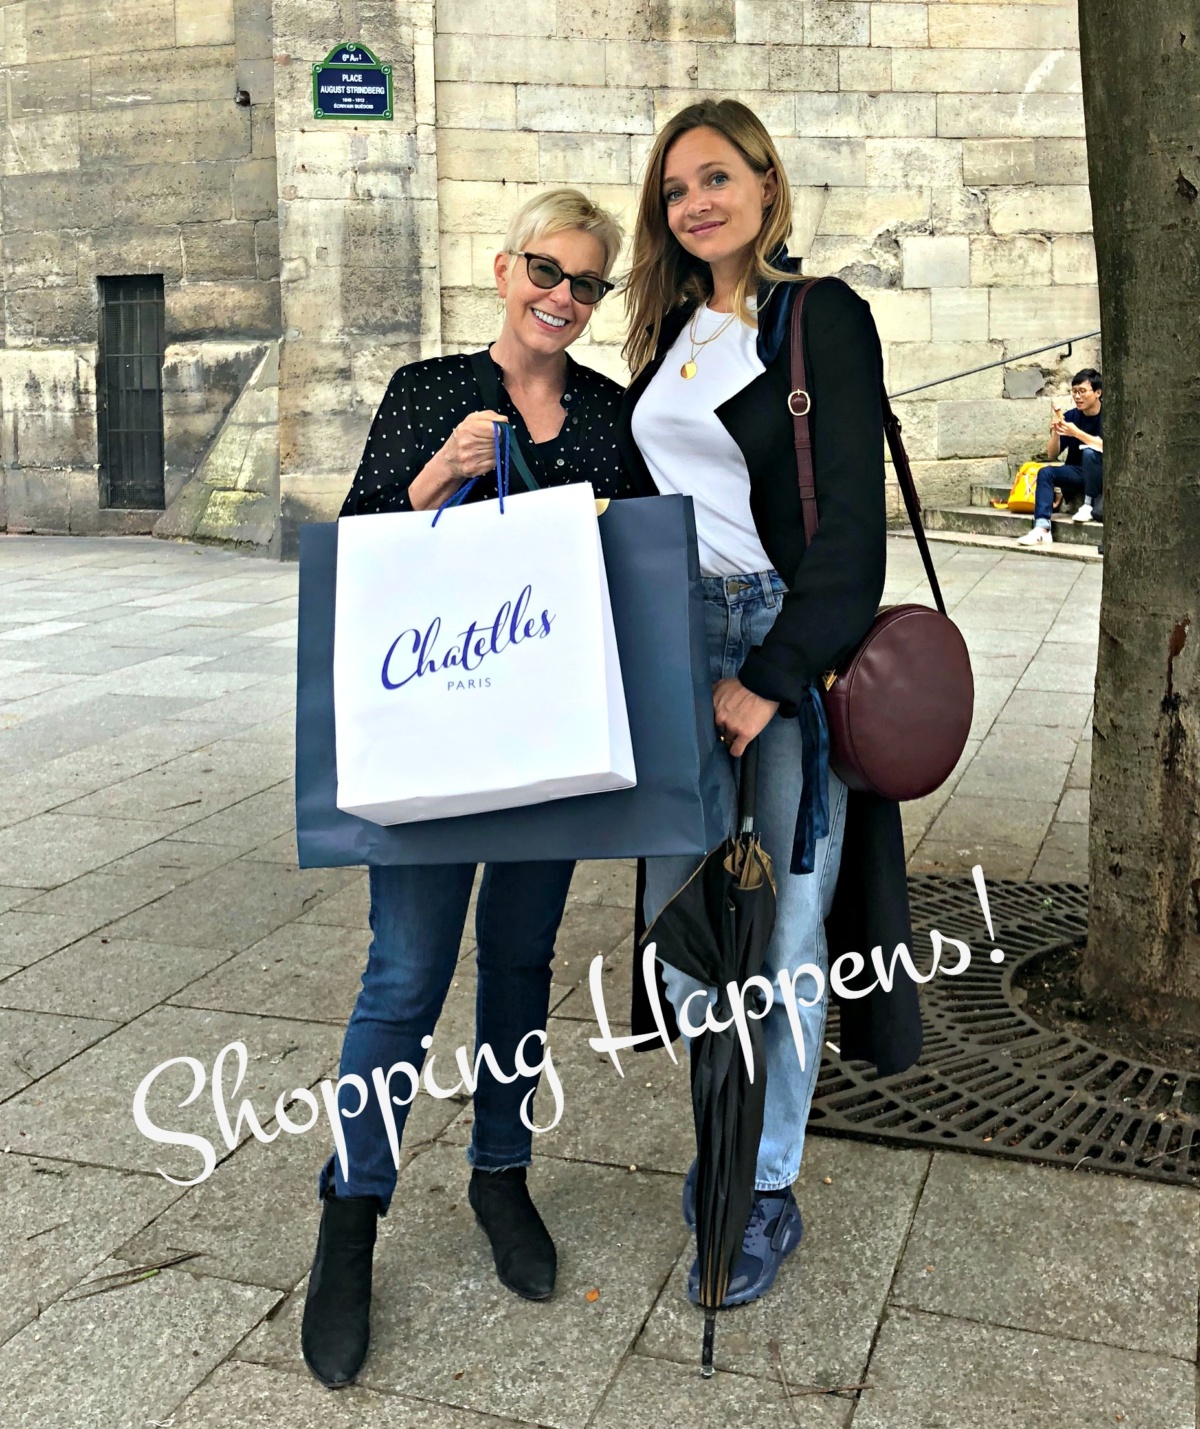 Style blogger Susan B. and Diane of Paris Shopping Tours after a successful day of shopping. Details at une femme d'un certain age.